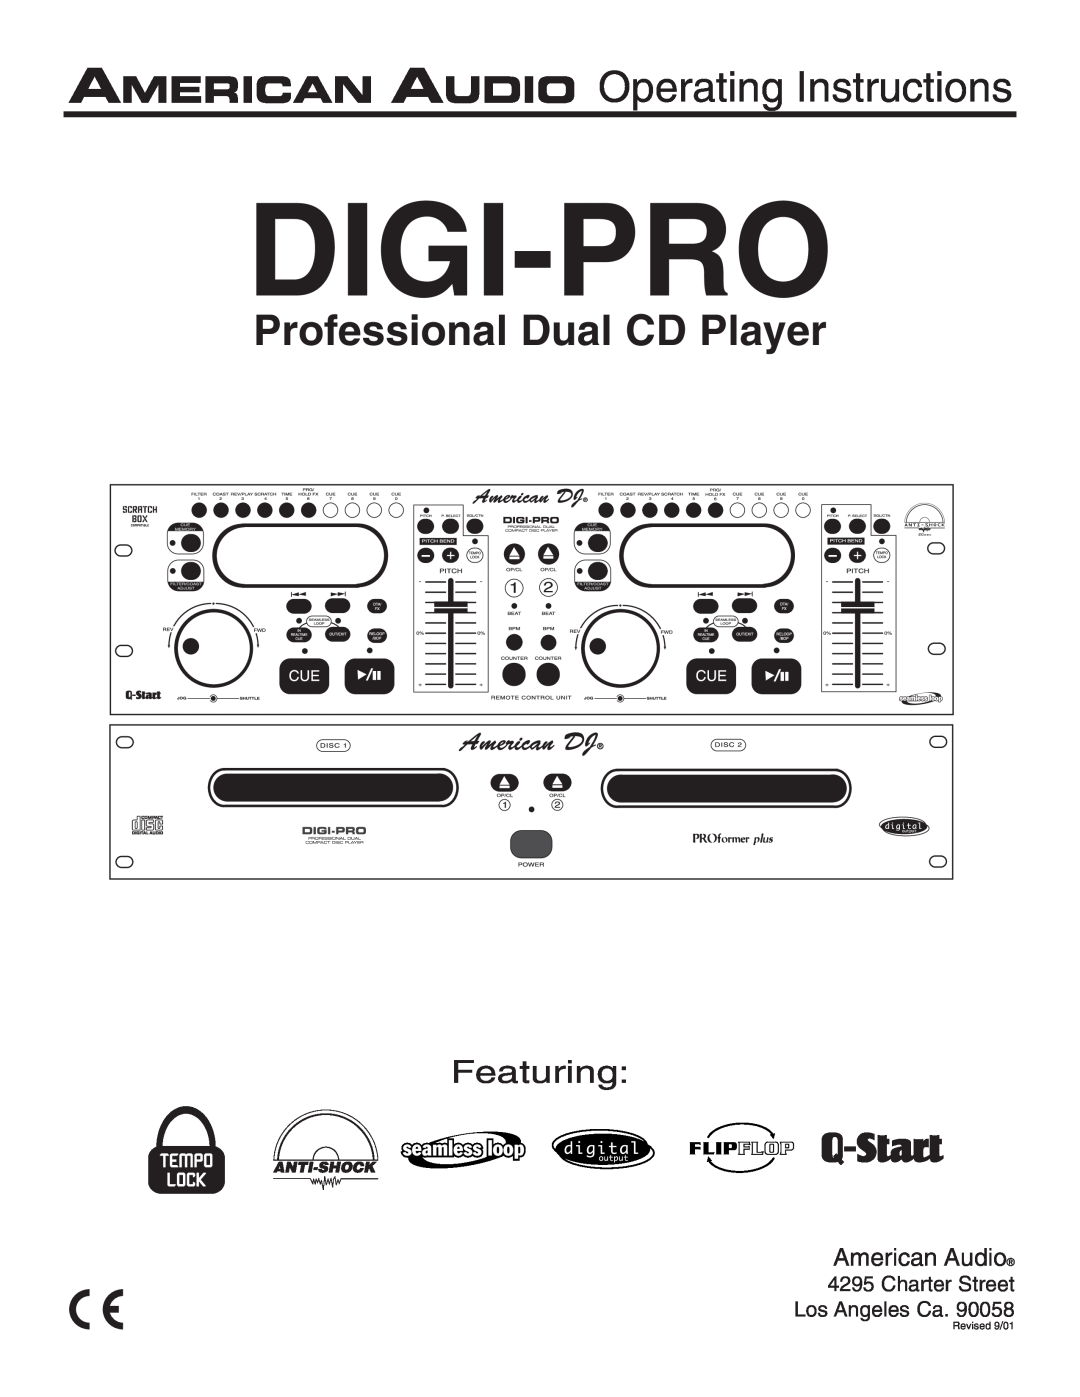 American Audio DIGI-PRO operating instructions Digi-Pro, Operating Instructions, Professional Dual CD Player, Featuring 